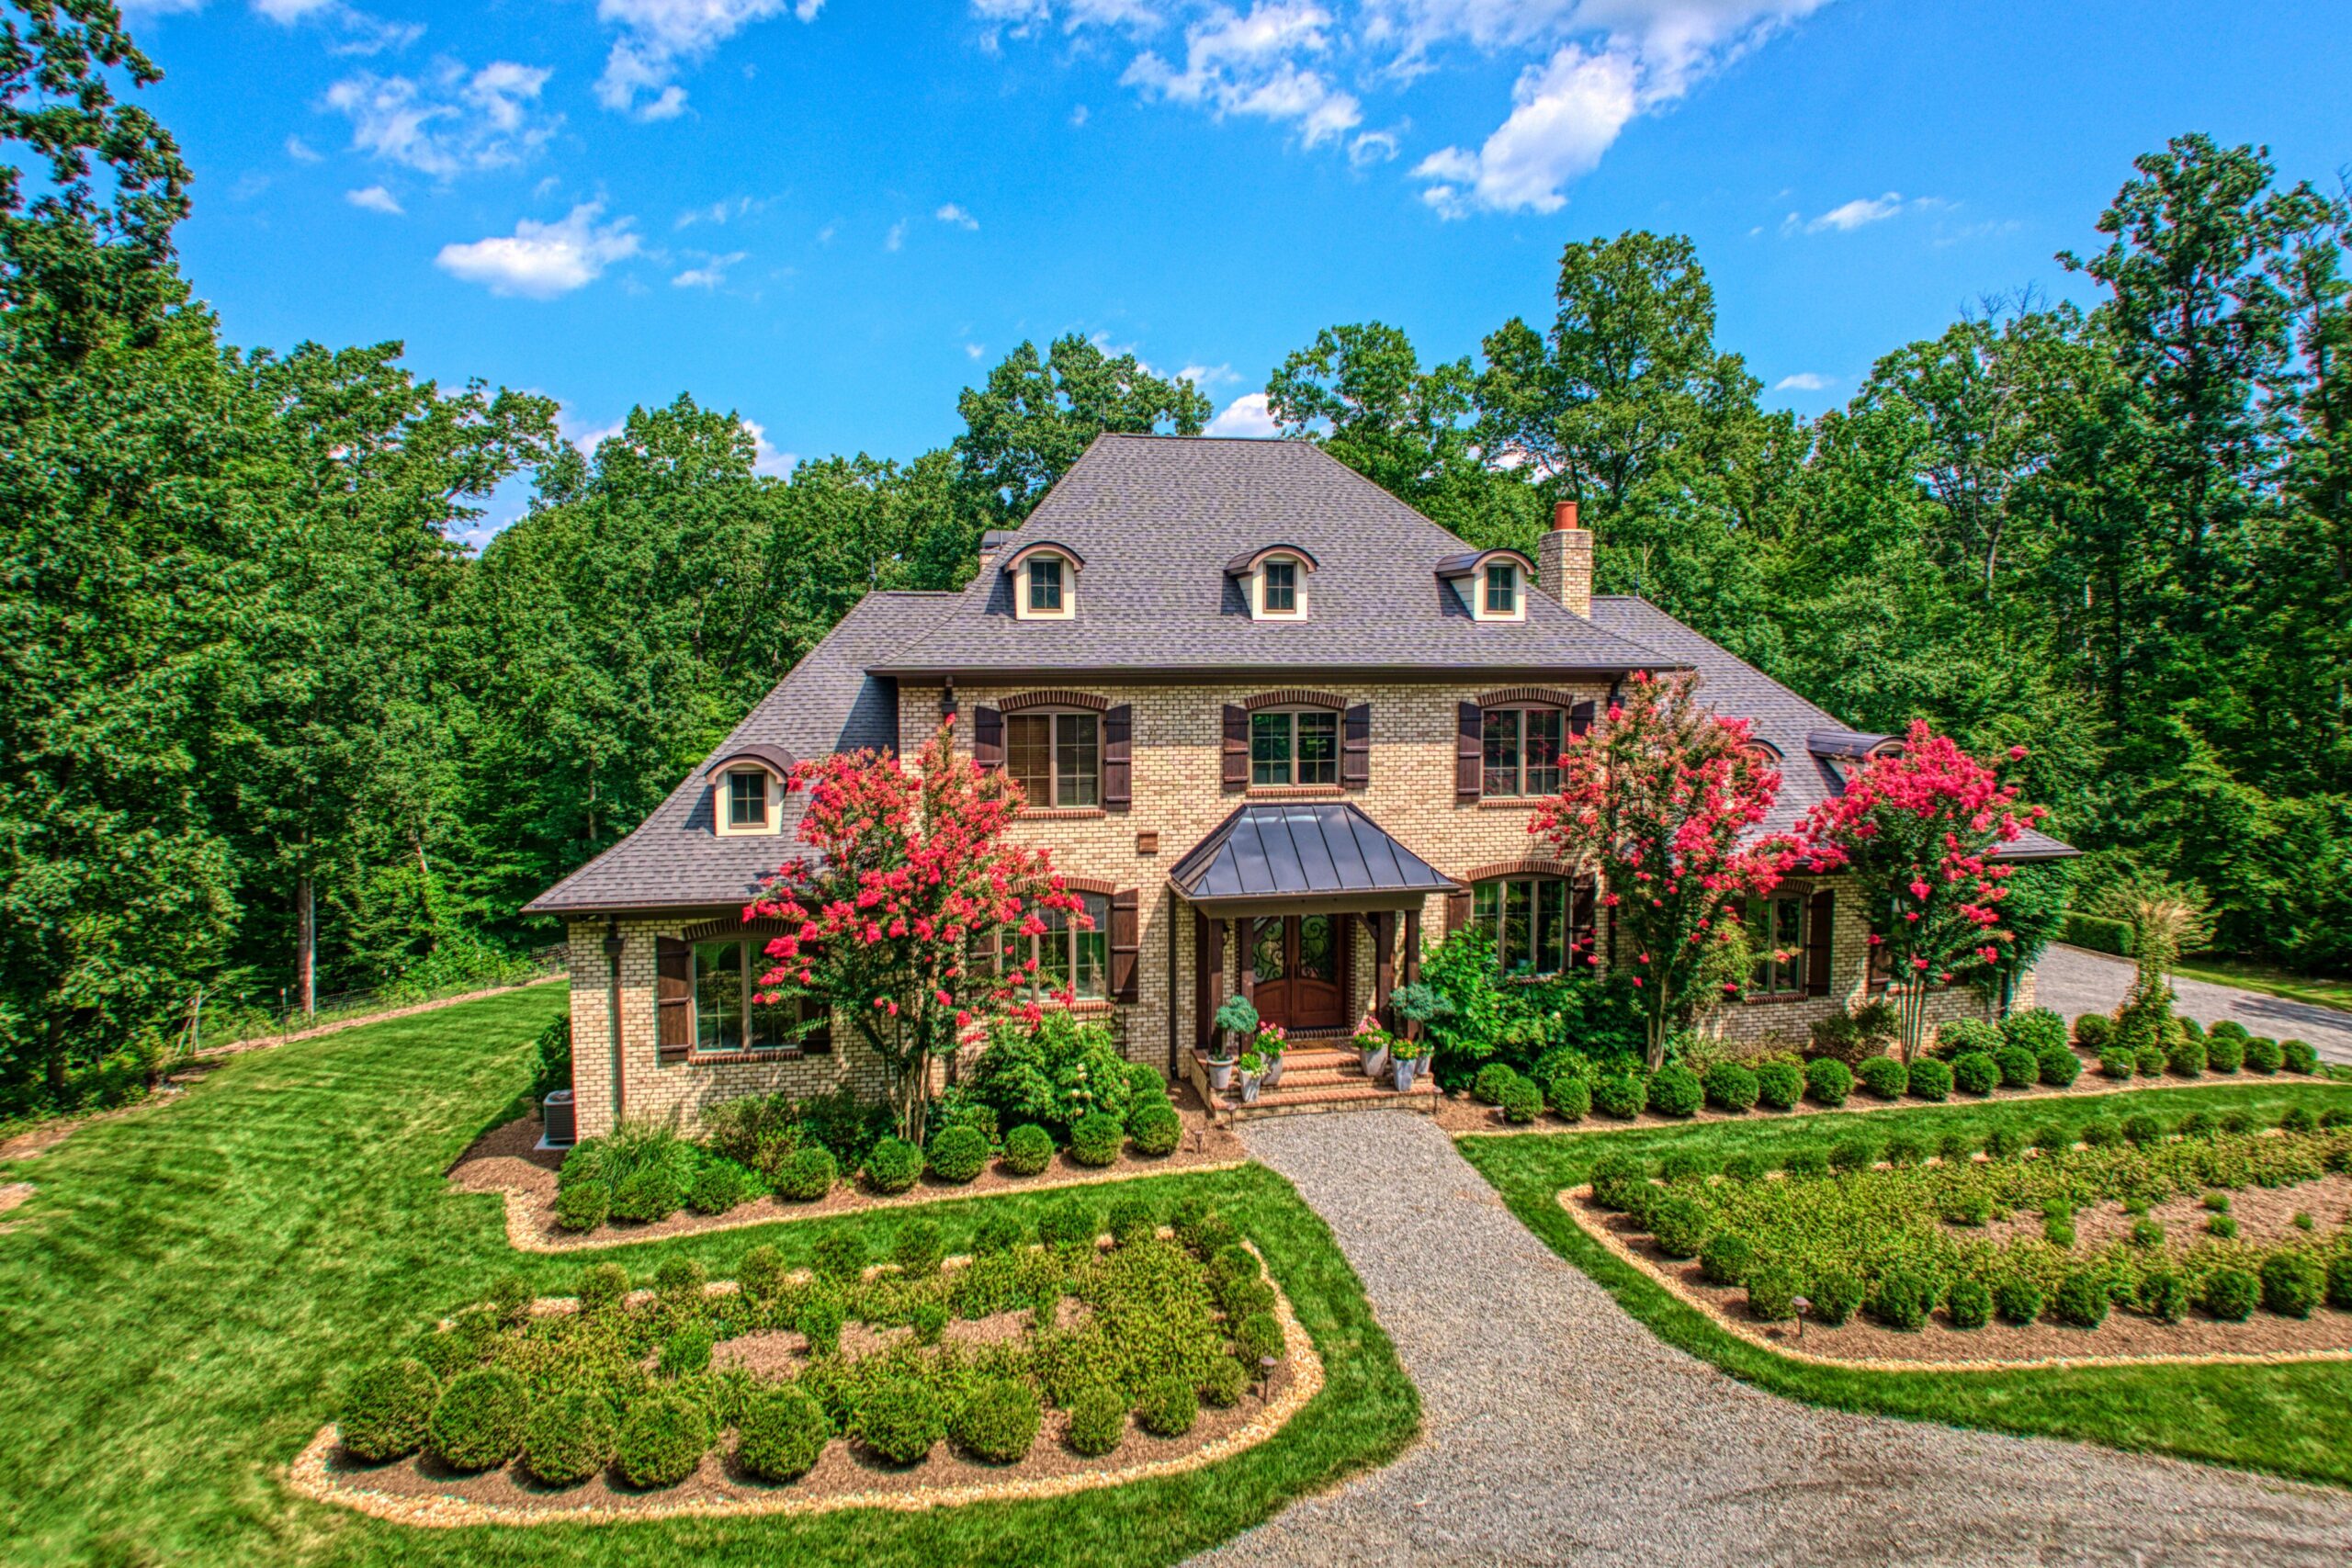 Professional exterior photo of 40046 Mount Gilead Rd in Leesburg, Virginia - showing the front of a french country style home with cream stone facade, ornate gardens that line either side of a gravel path to the front entrance